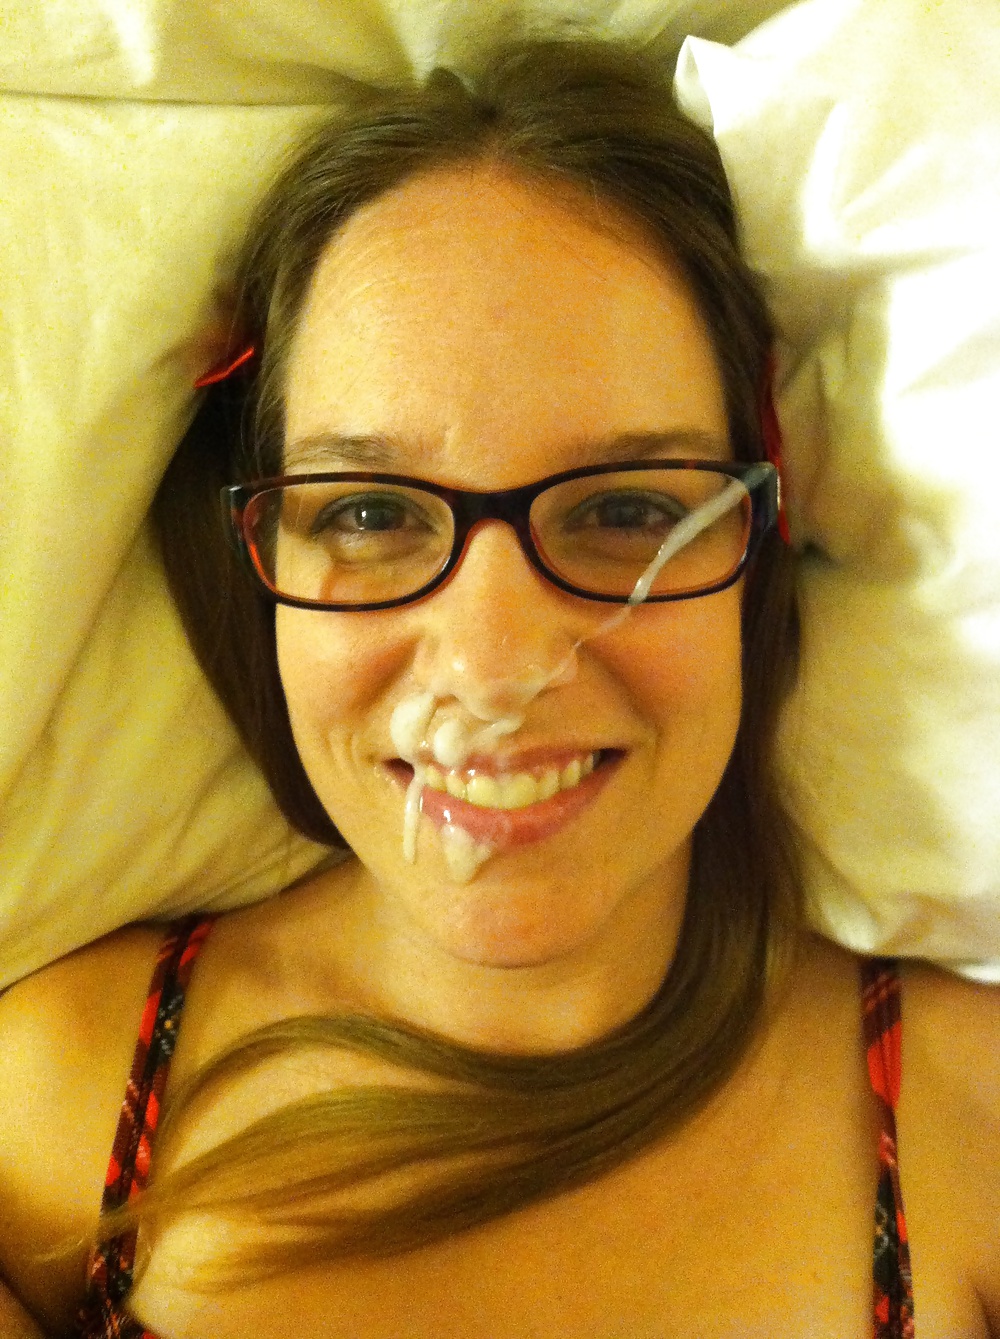 Nerdy Girls with Glasses Facials #29635315